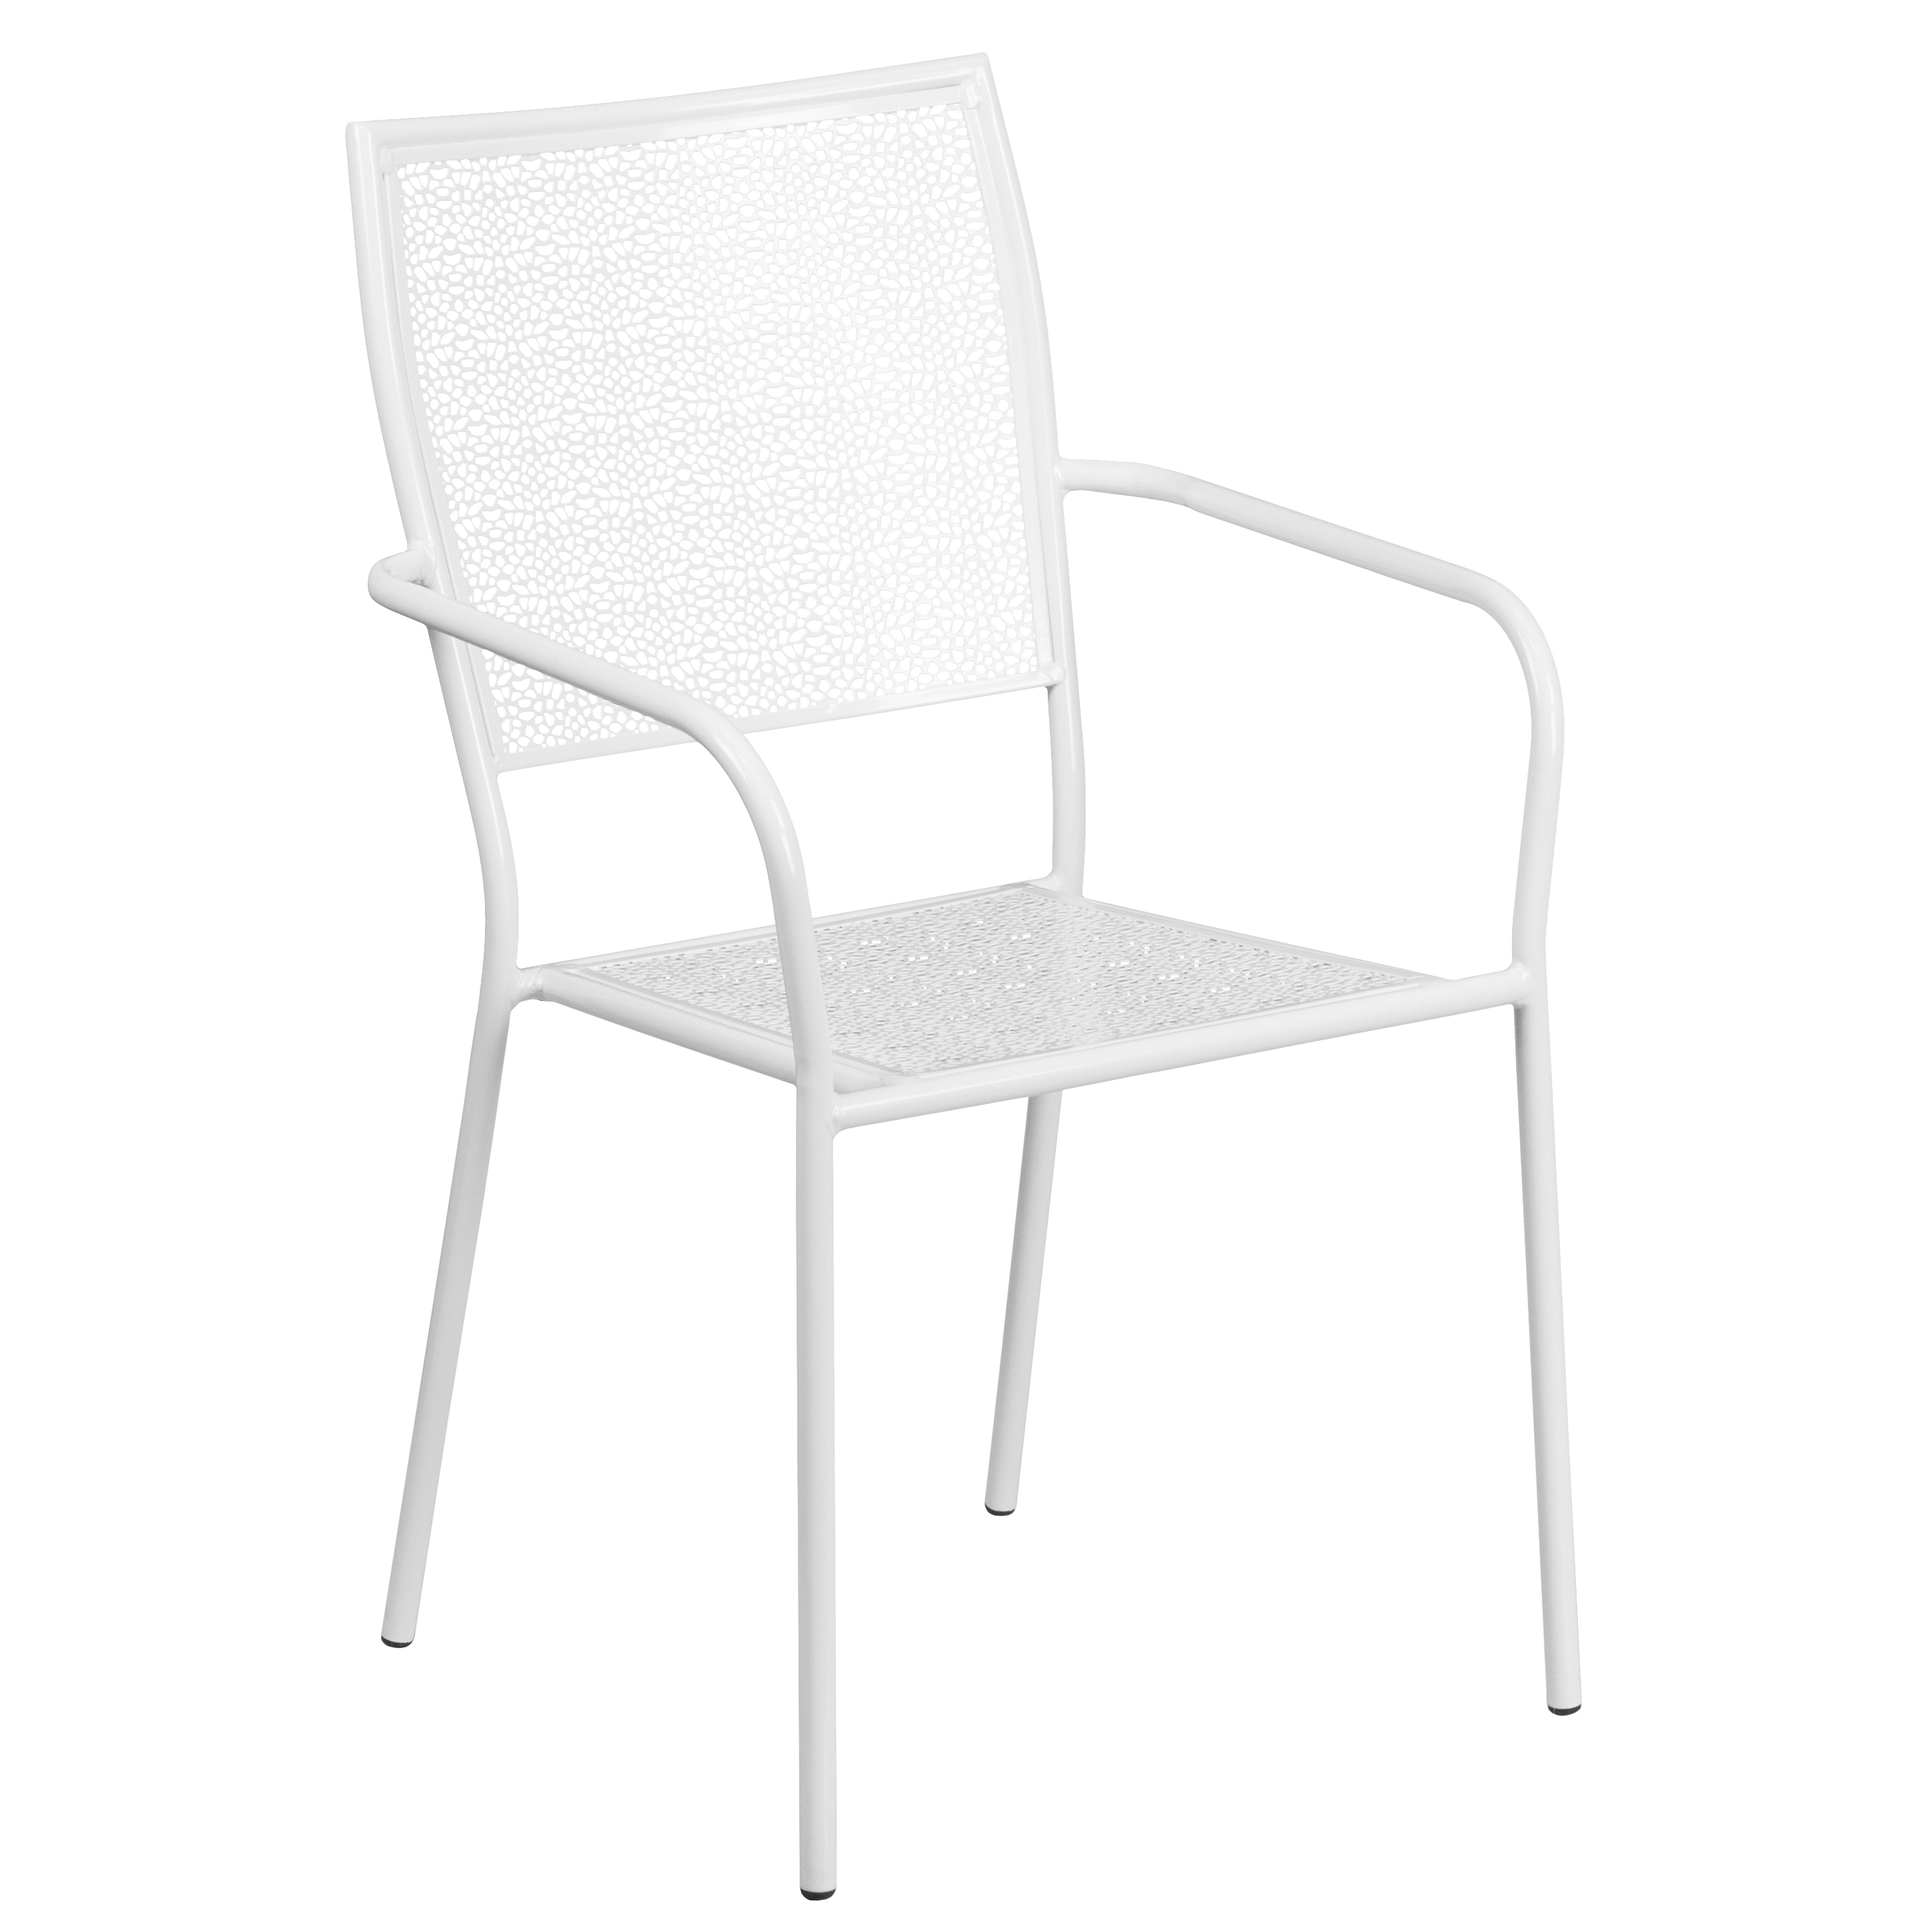 Flash Furniture Oia Commercial Grade 35.25" Round White Indoor-Outdoor Steel Patio Table Set with 4 Square Back Chairs - image 5 of 5